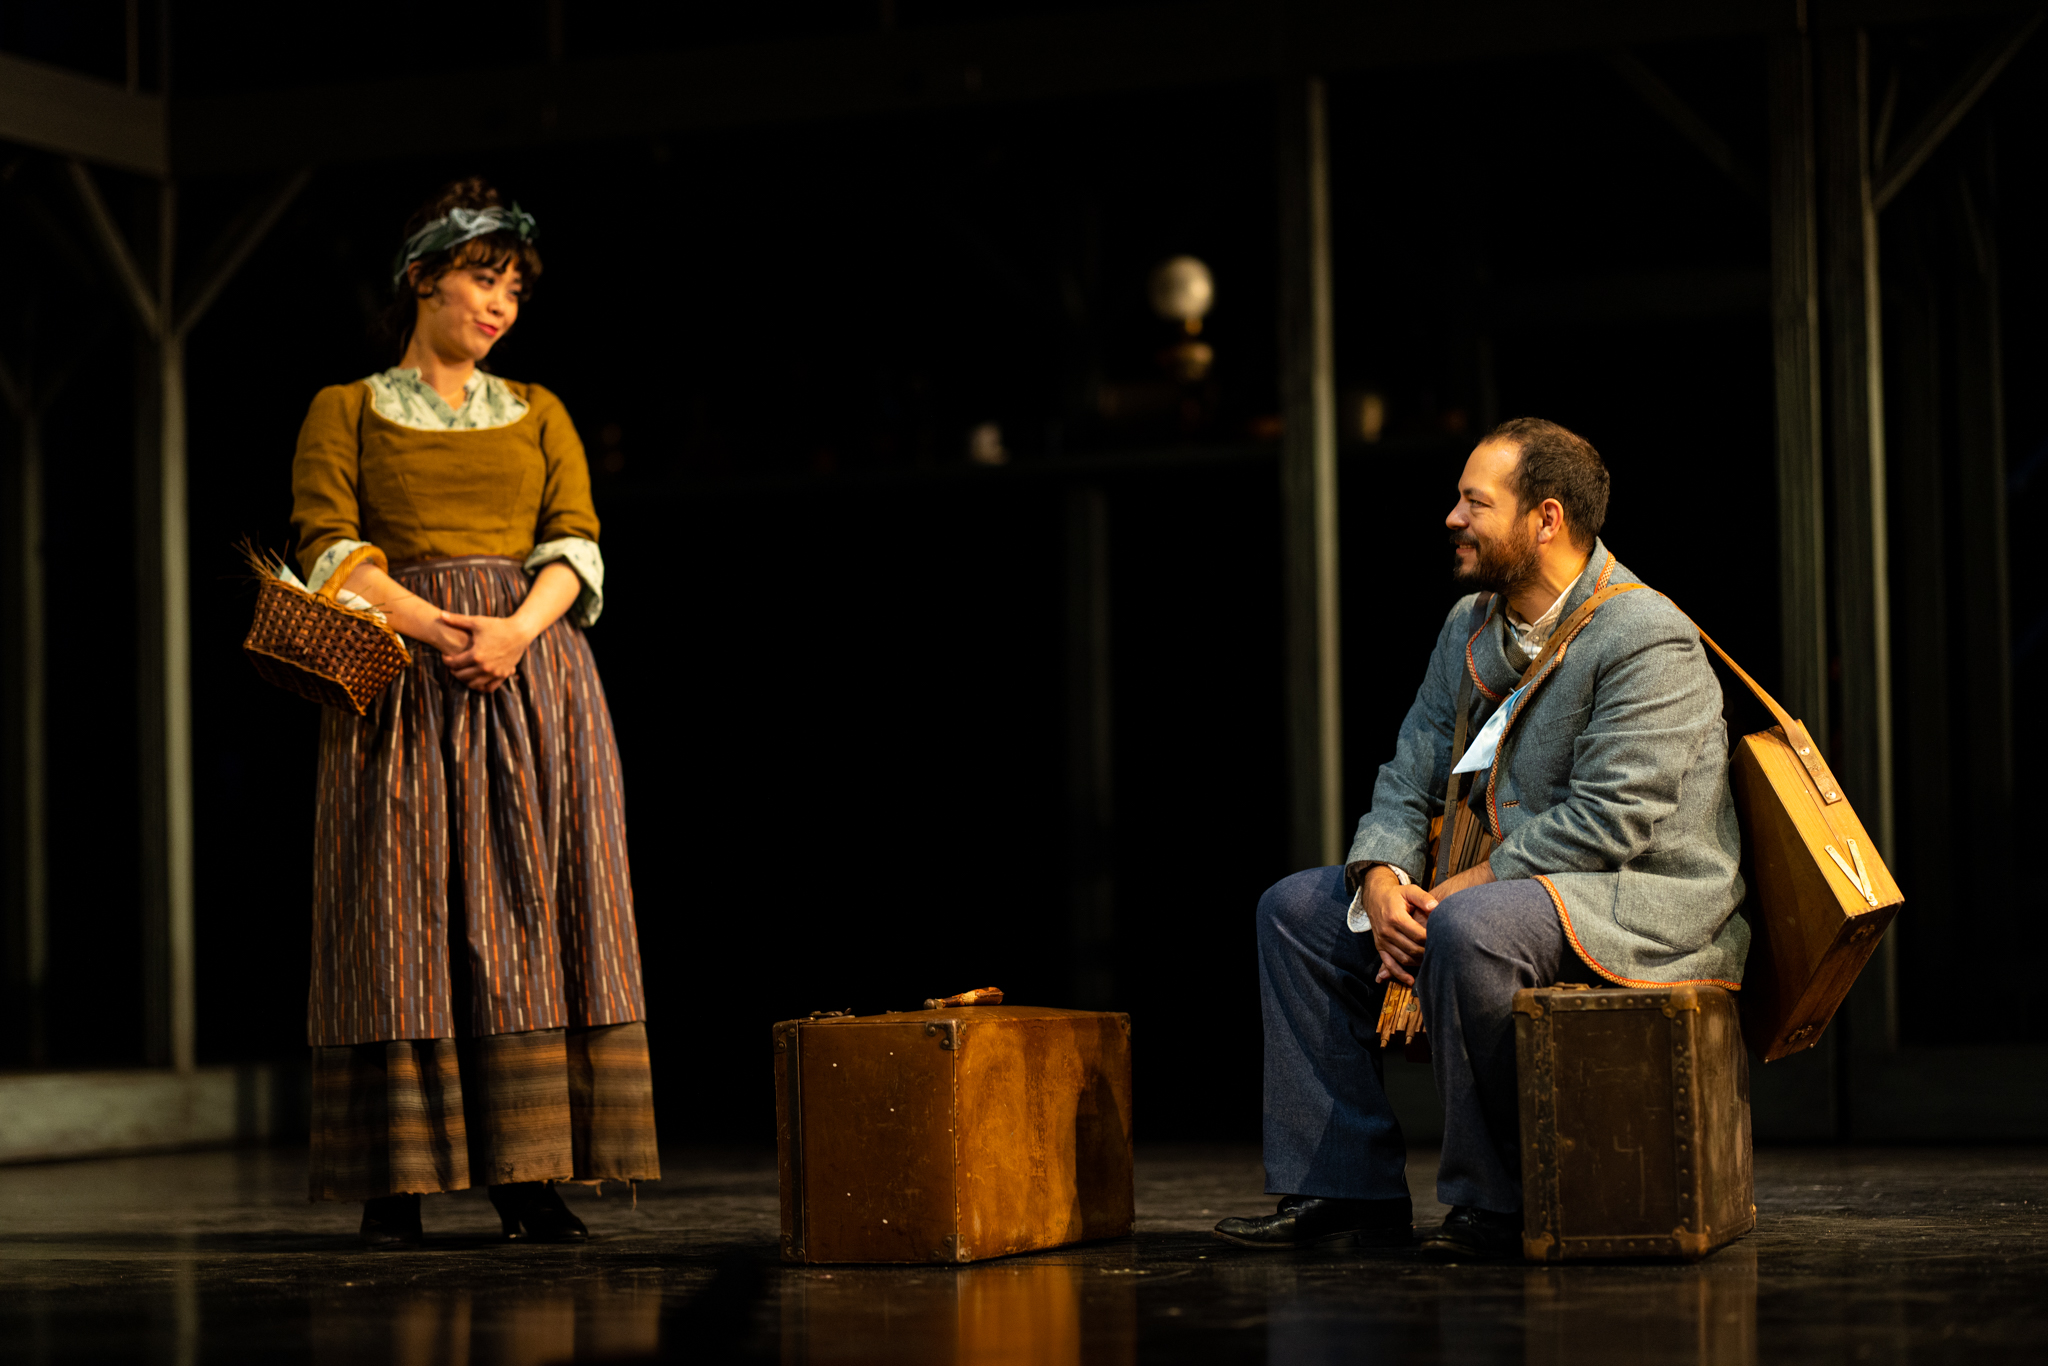 Brooke Ishibashi as “Marie” and Paco Tolson as “Vincent” in La Jolla Playhouse’s world-premiere production of TO THE YELLOW HOUSE, by Kimber Lee, directed by Neel Keller; photo by Rich Soublet II.